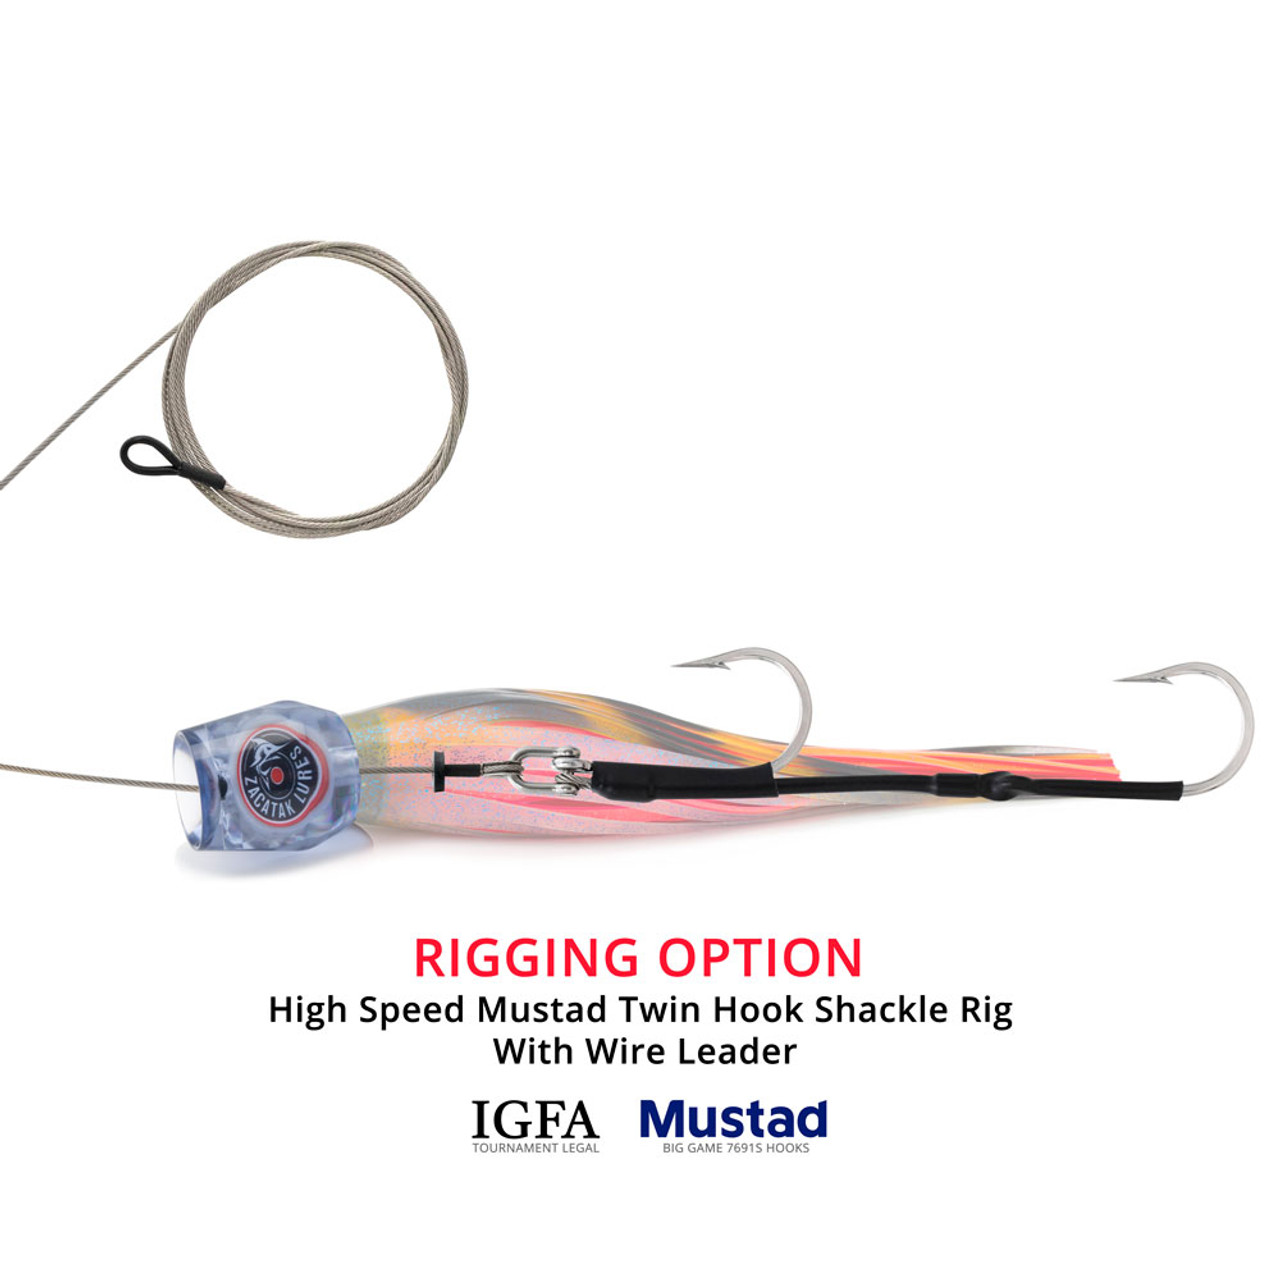 https://cdn11.bigcommerce.com/s-sv4r4mic/images/stencil/1280x1280/products/9013/48987/zacatak-lures-high-speed-rigging-option-twin-hook-shackle-rig-roach__67668.1671433888.jpg?c=2?imbypass=on